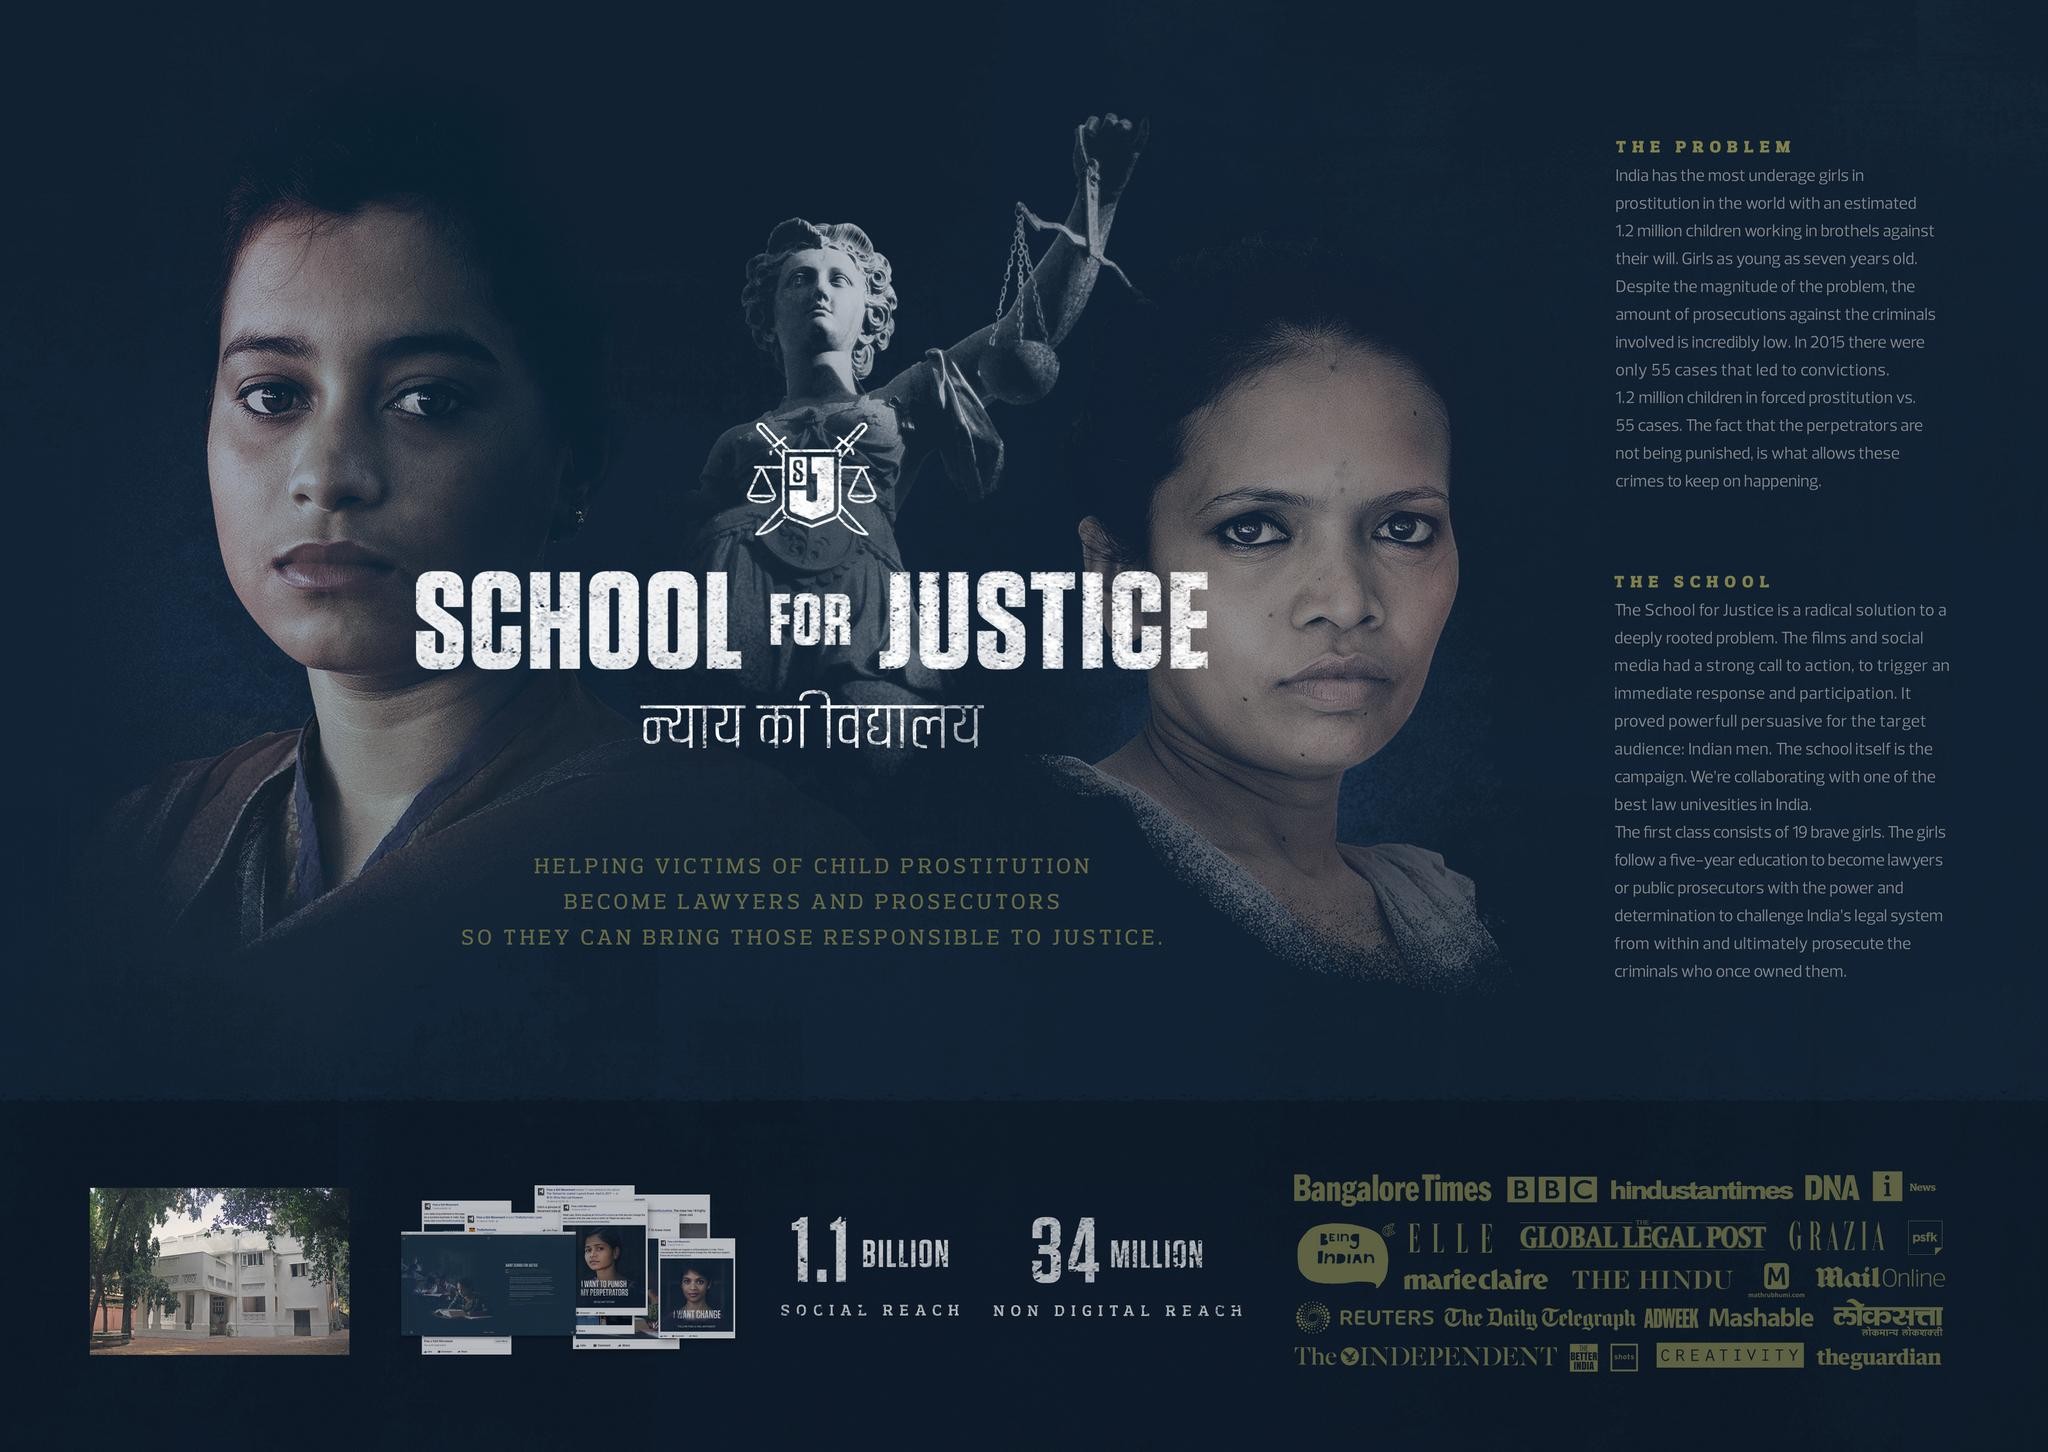 SCHOOL FOR JUSTICE